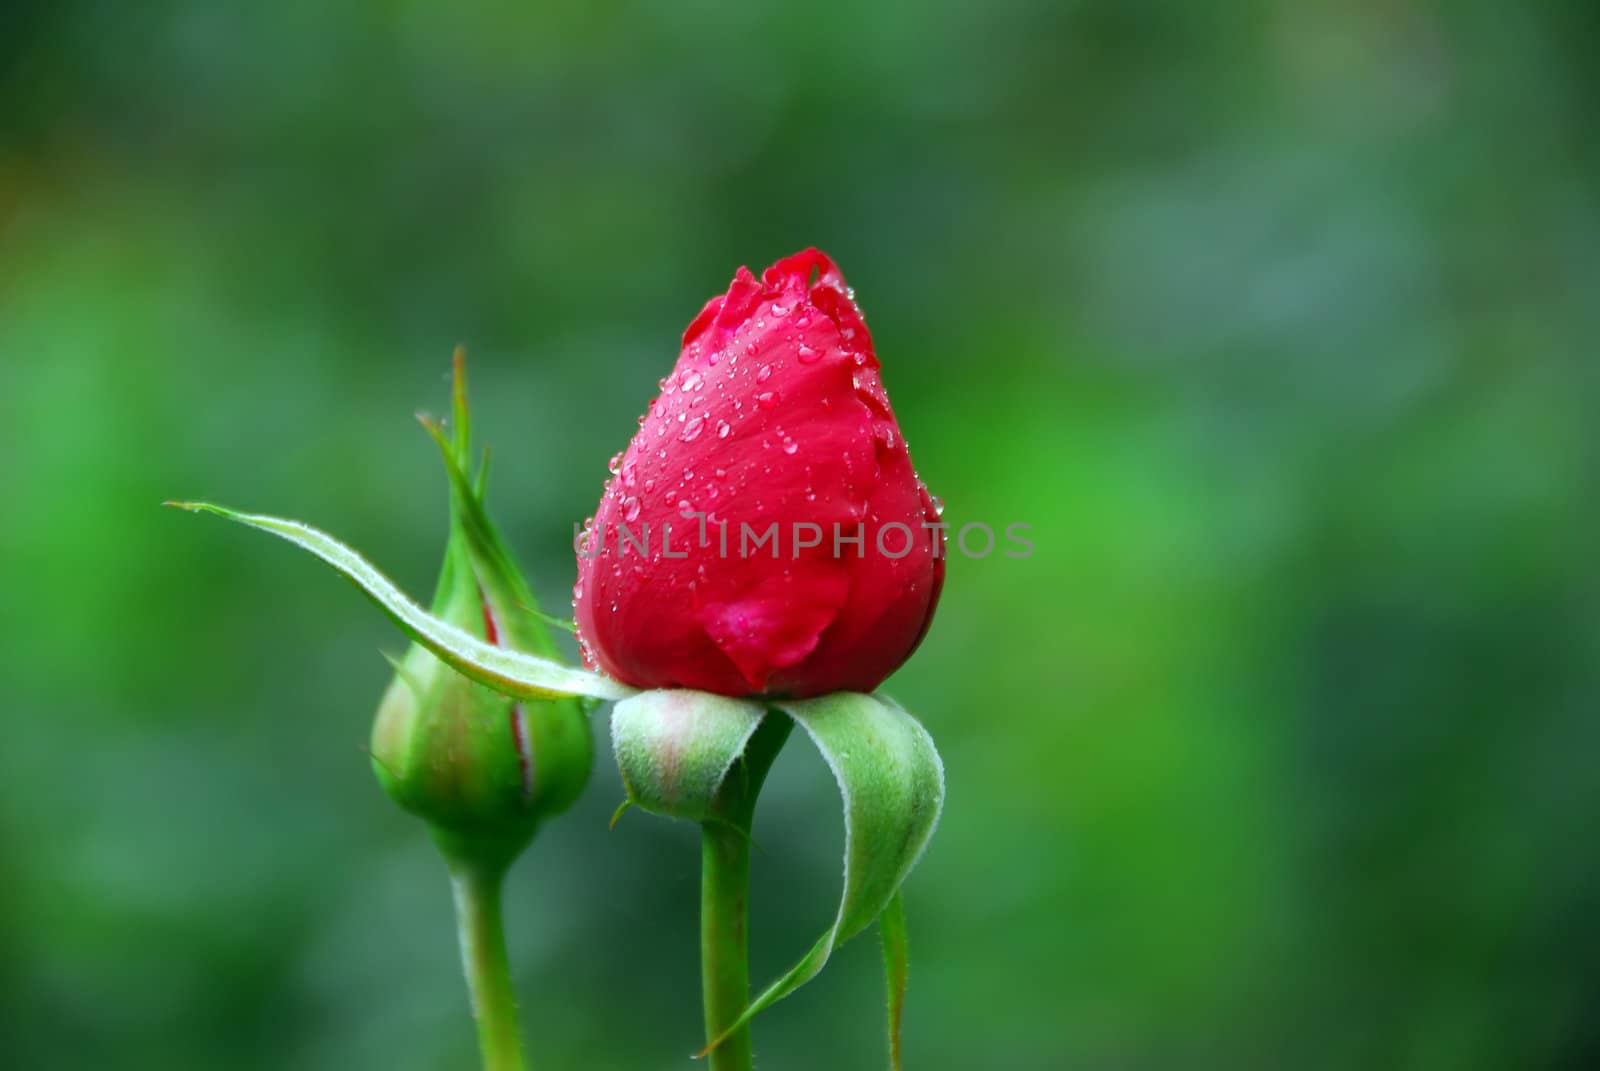 Close-up picture of two red rose's buds, one is ready to open